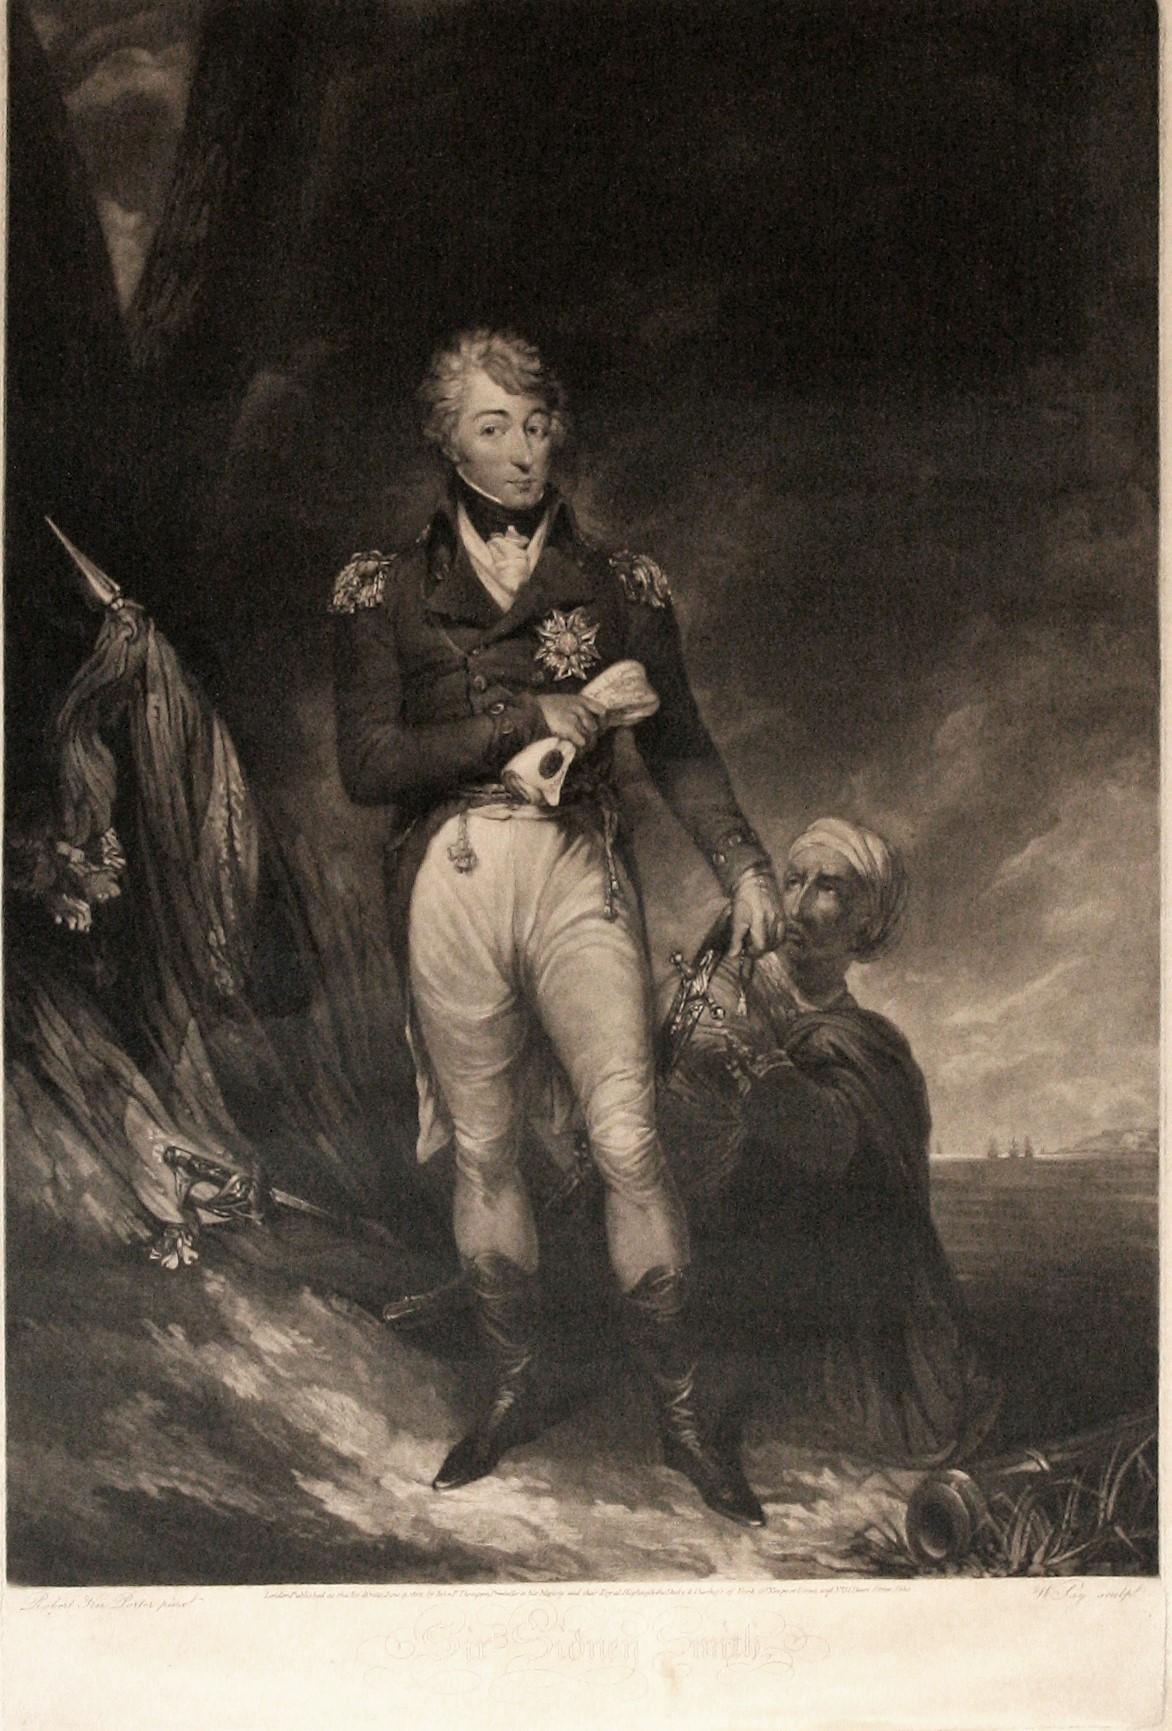 Mezzotint after the painting by Robert Ker Porter (1777-1842). 25 1/4 x 17 (plate). Text: 'Robert Ker Porter pinx.t. W.Say sculp.t. London Published as the Act directs, June 19 1802, by John P. Thompson, Printseller to his Majesty and their Royal